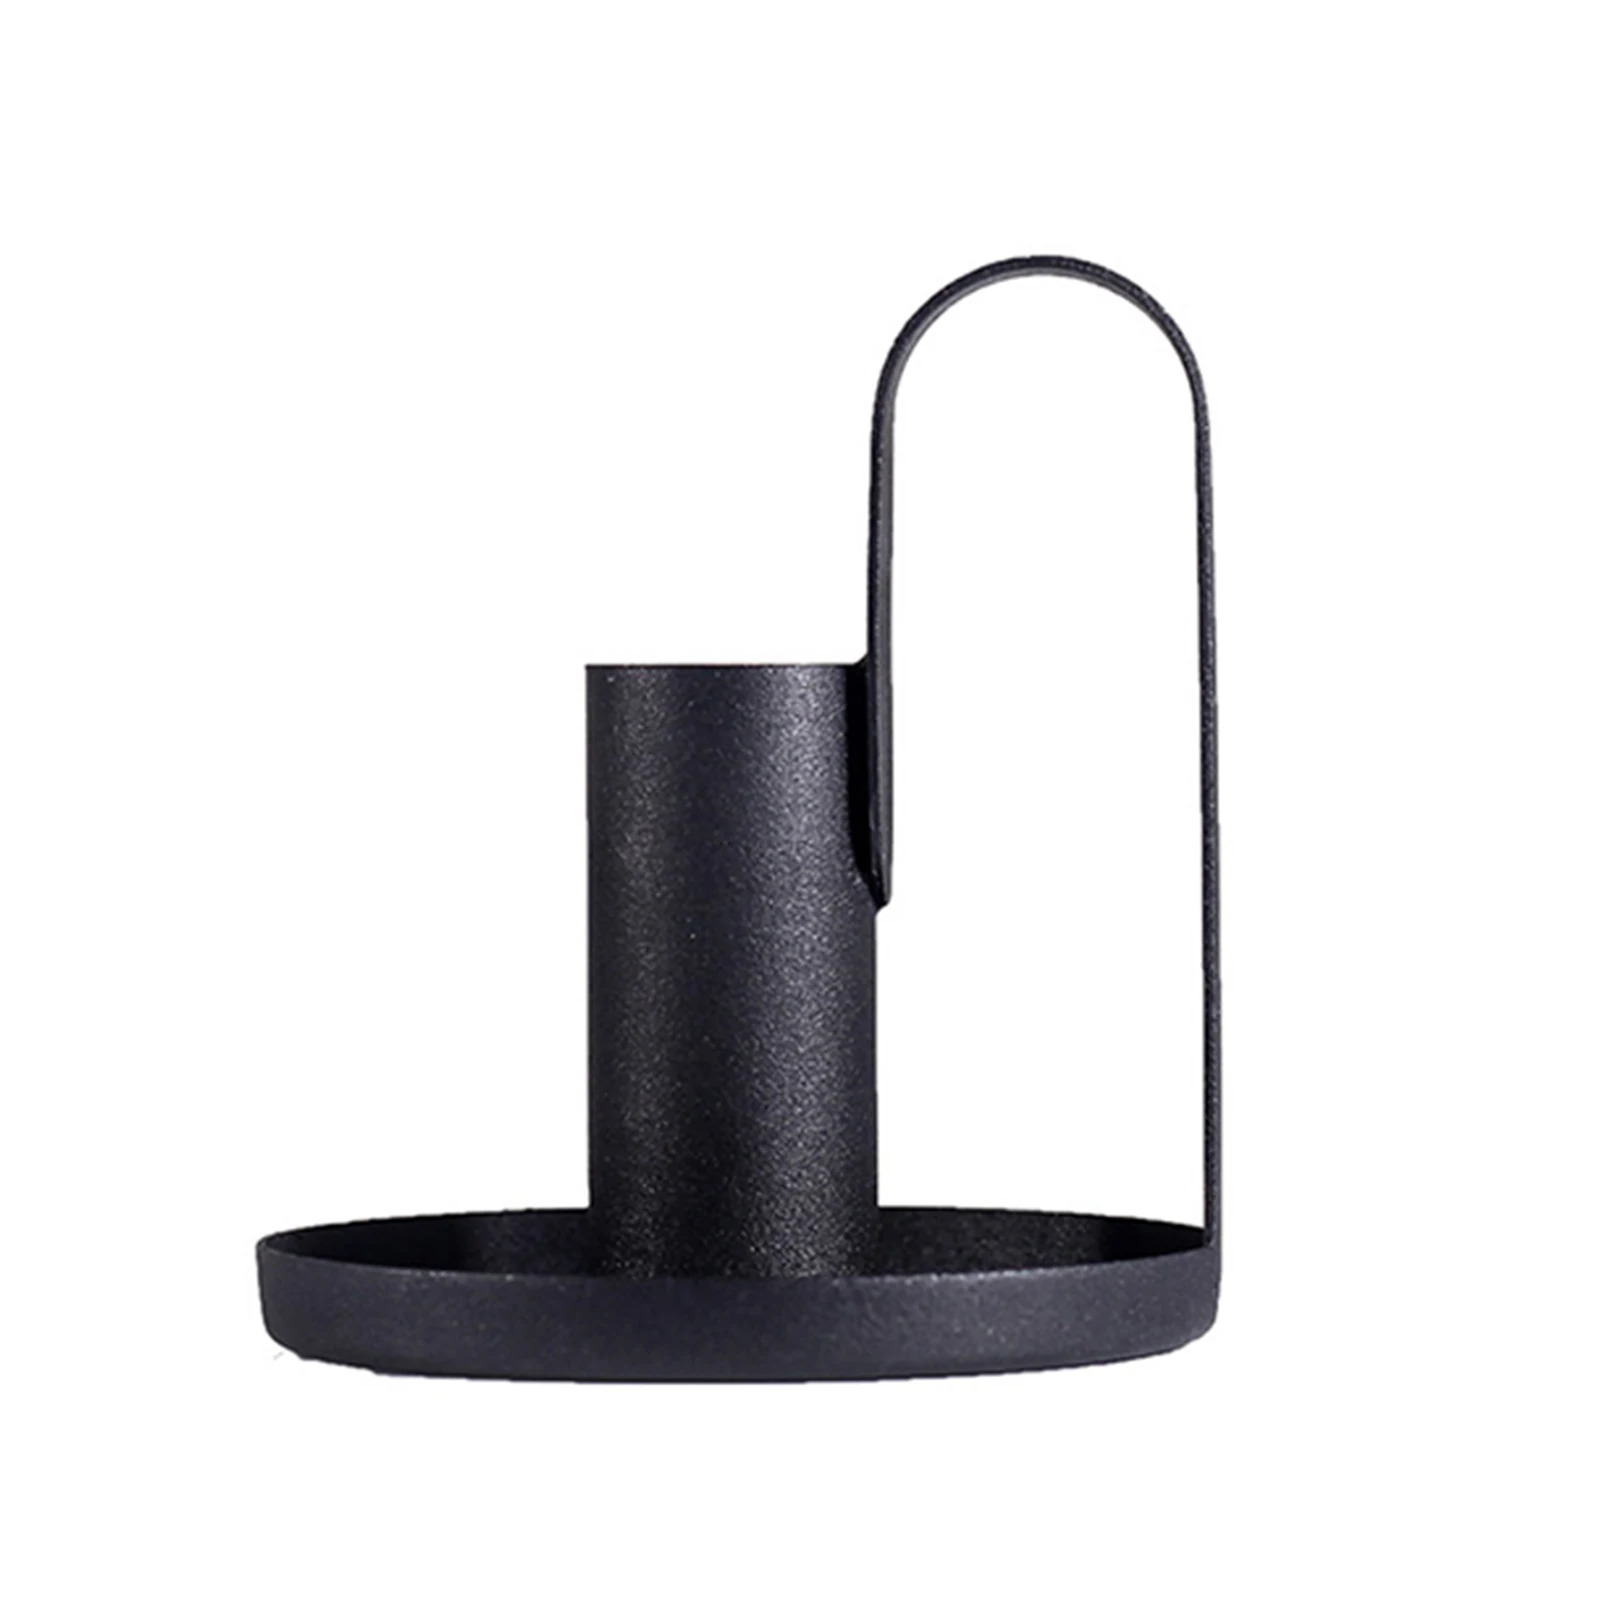  Black Candle Holders  European Style Candlestick For Wedding Dinning Party - $182.38